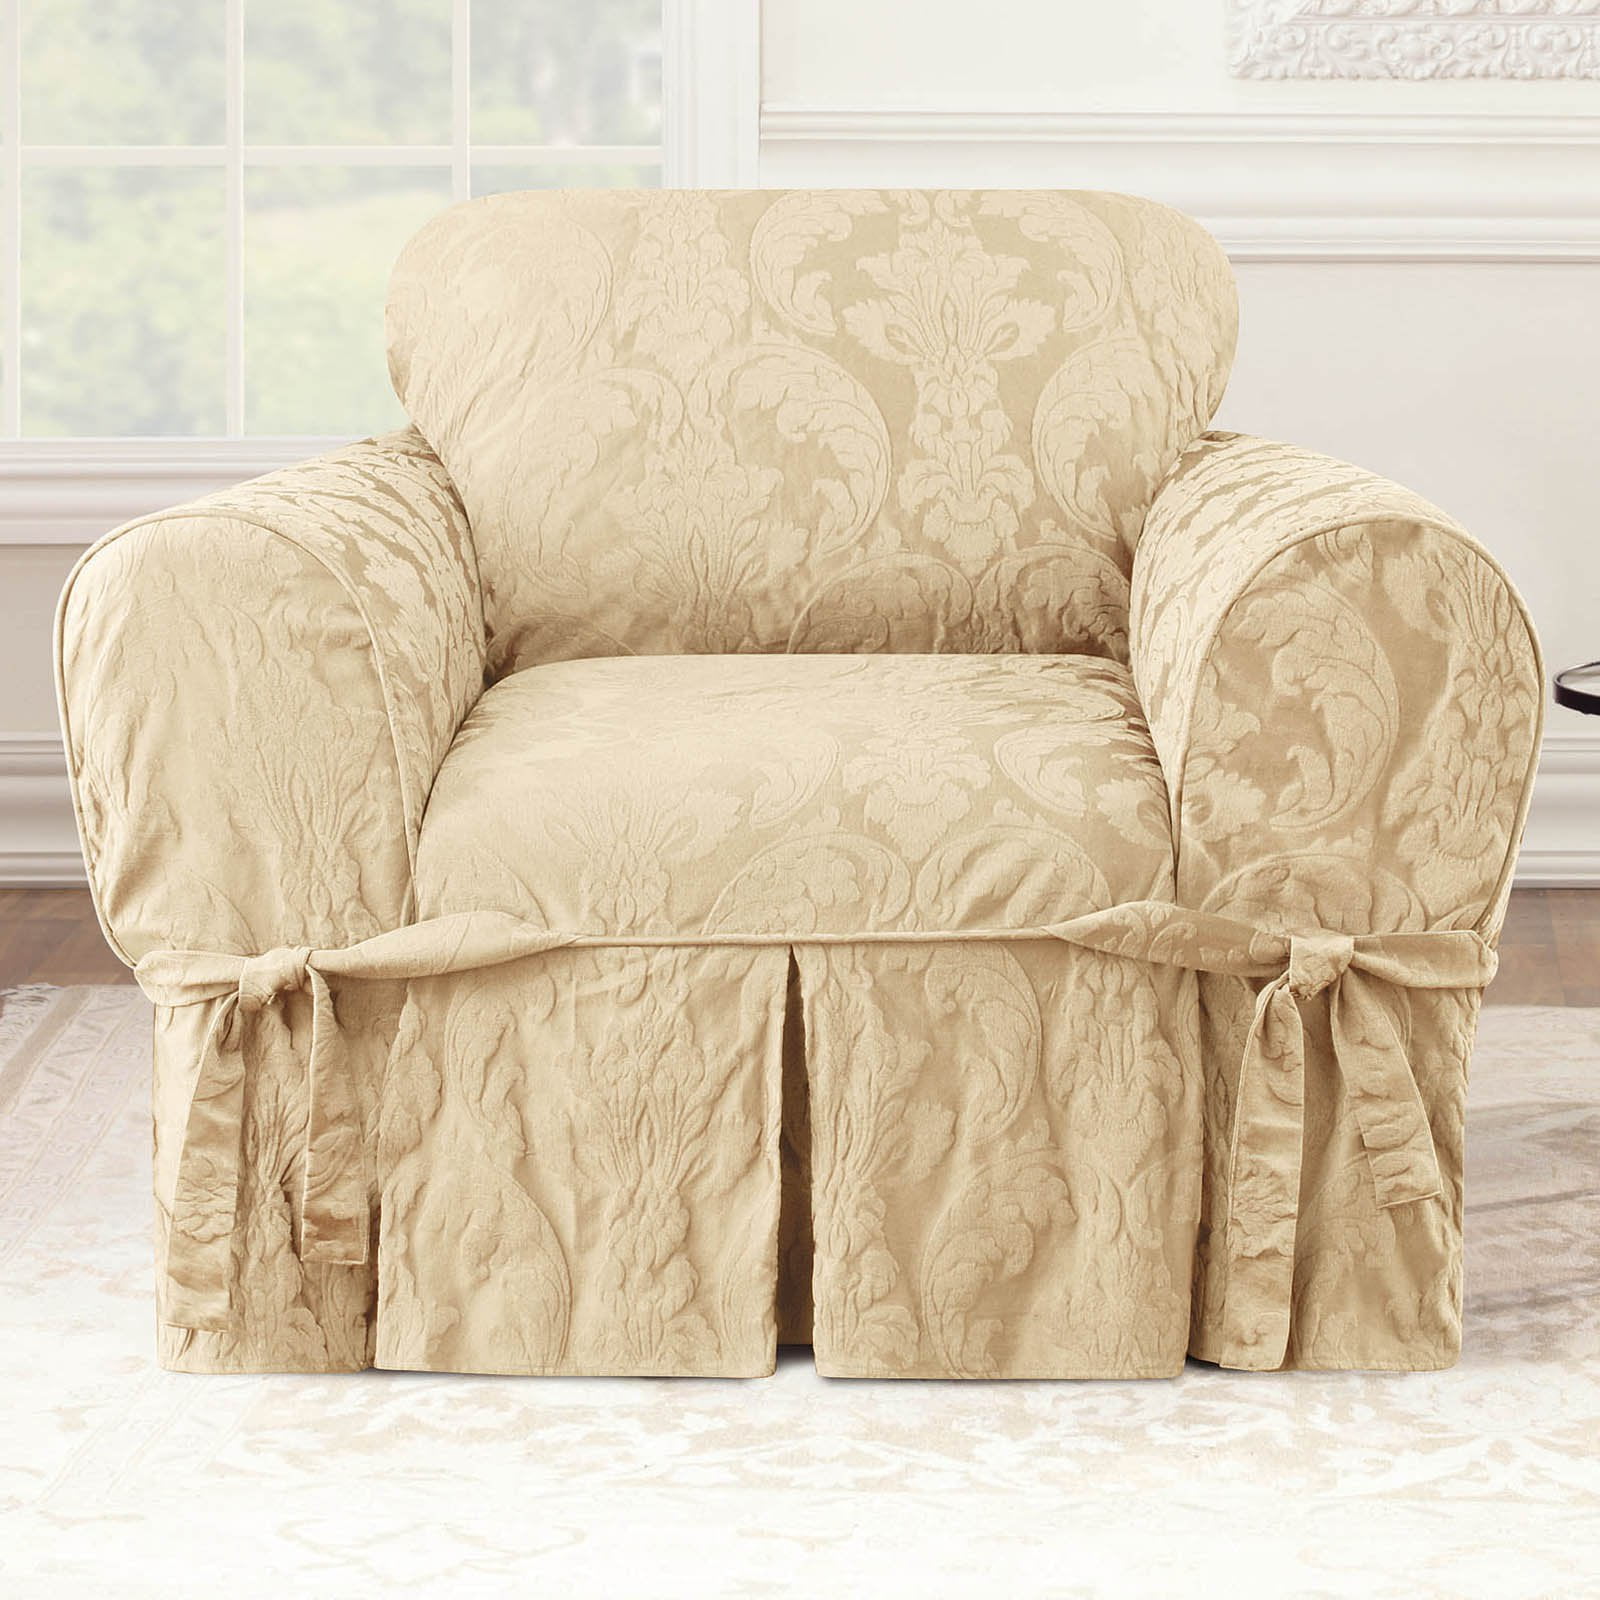 Sure Fit Matelasse Damask Chair, Sure Fit Matelasse Damask Dining Room Chair Slipcover